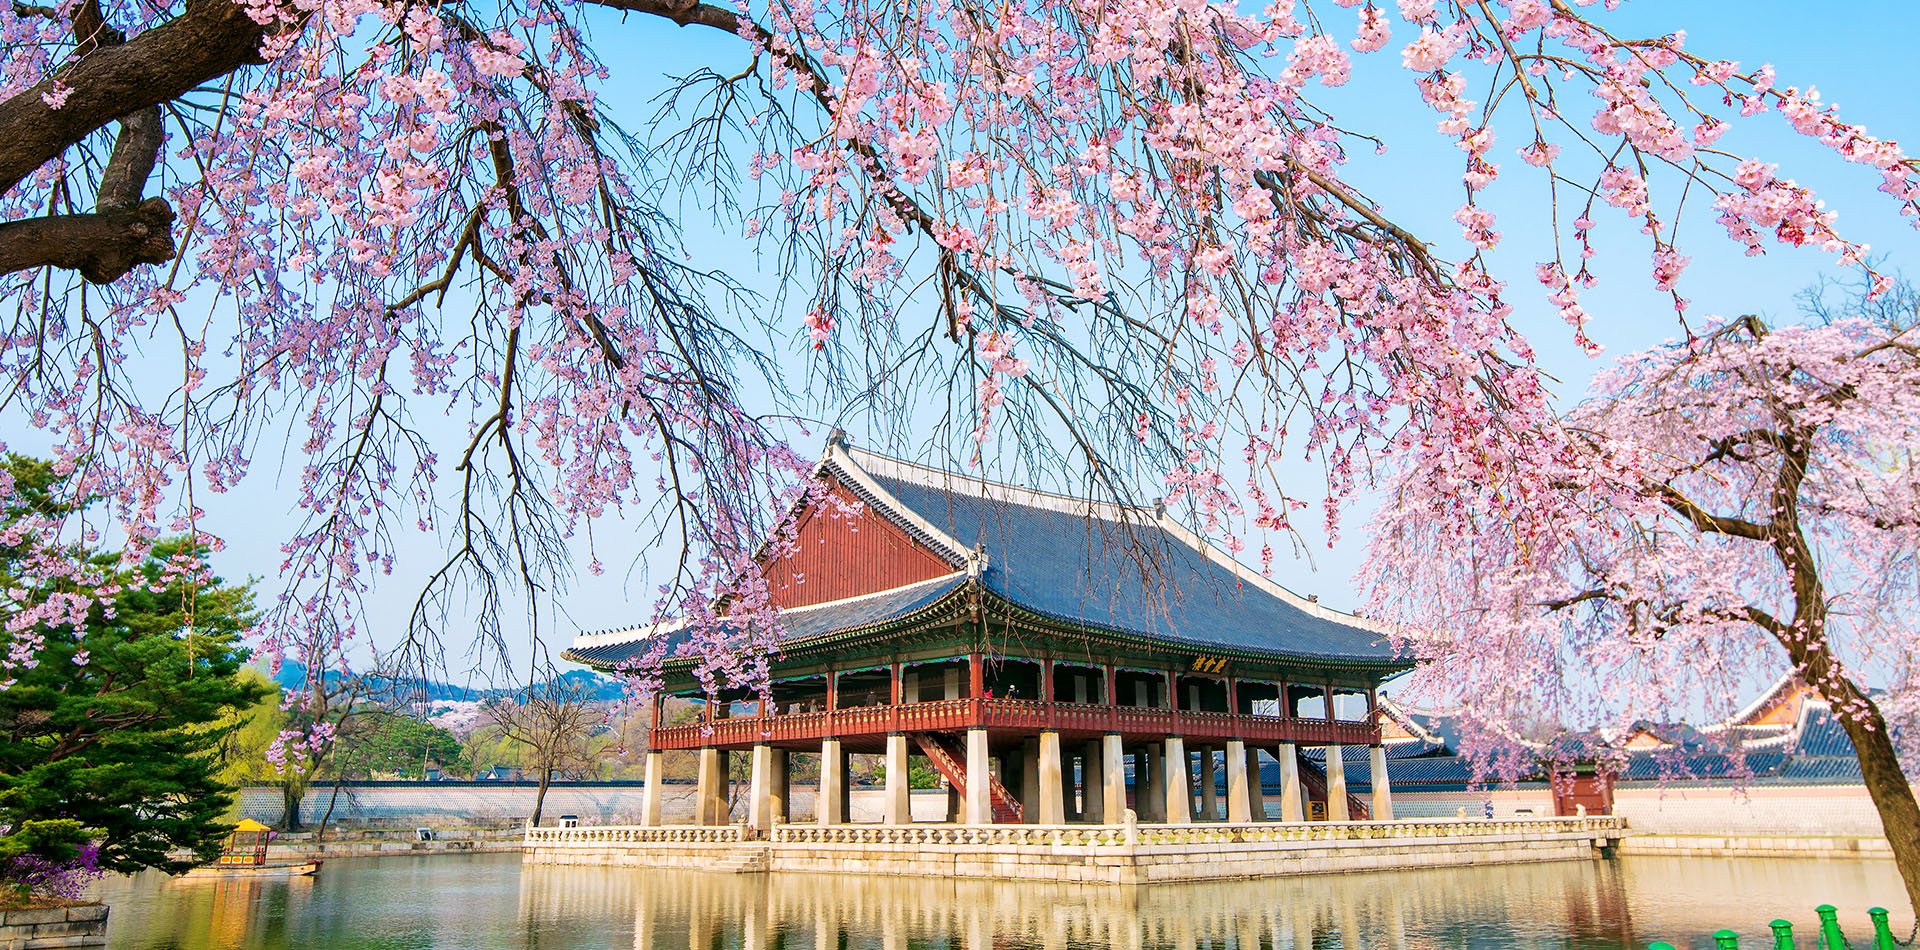 Seoul with cherry blossom